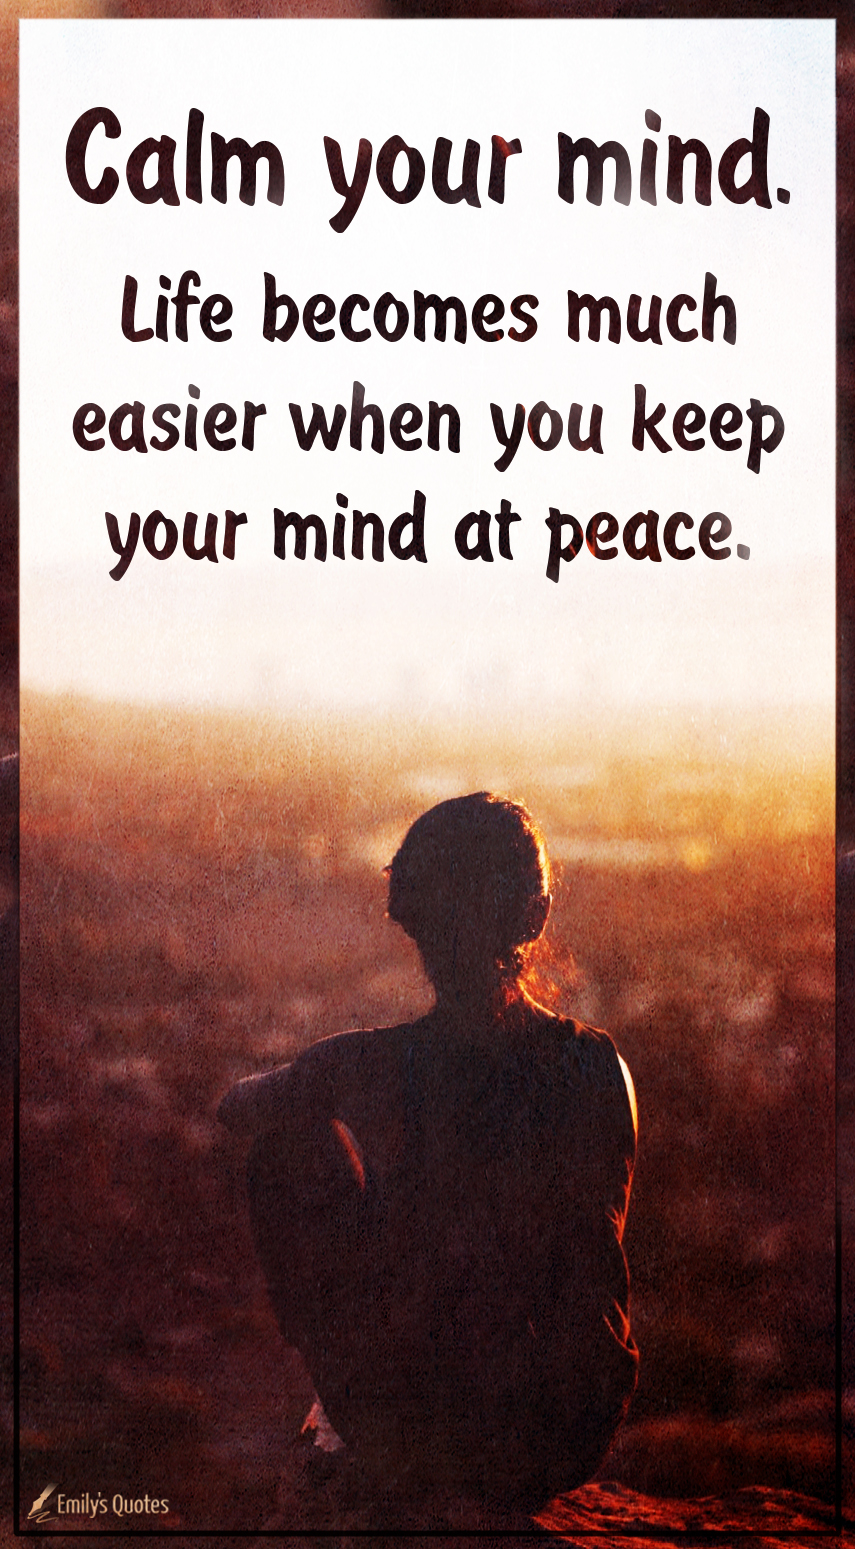 Calm your mind. Life becomes much easier when you keep your mind at peace